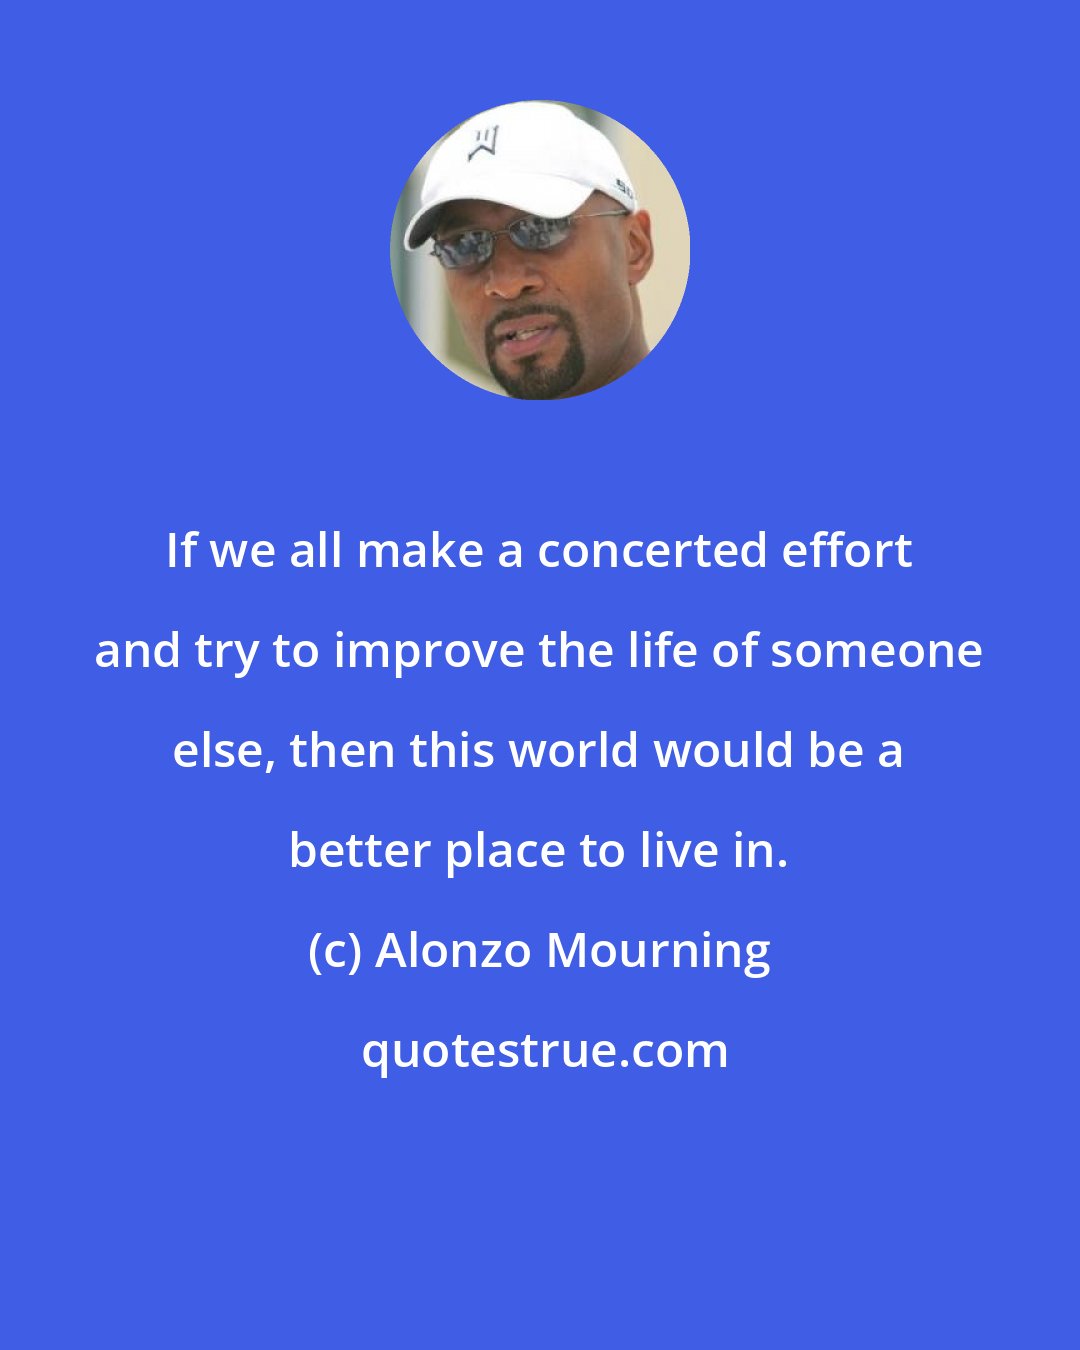 Alonzo Mourning: If we all make a concerted effort and try to improve the life of someone else, then this world would be a better place to live in.